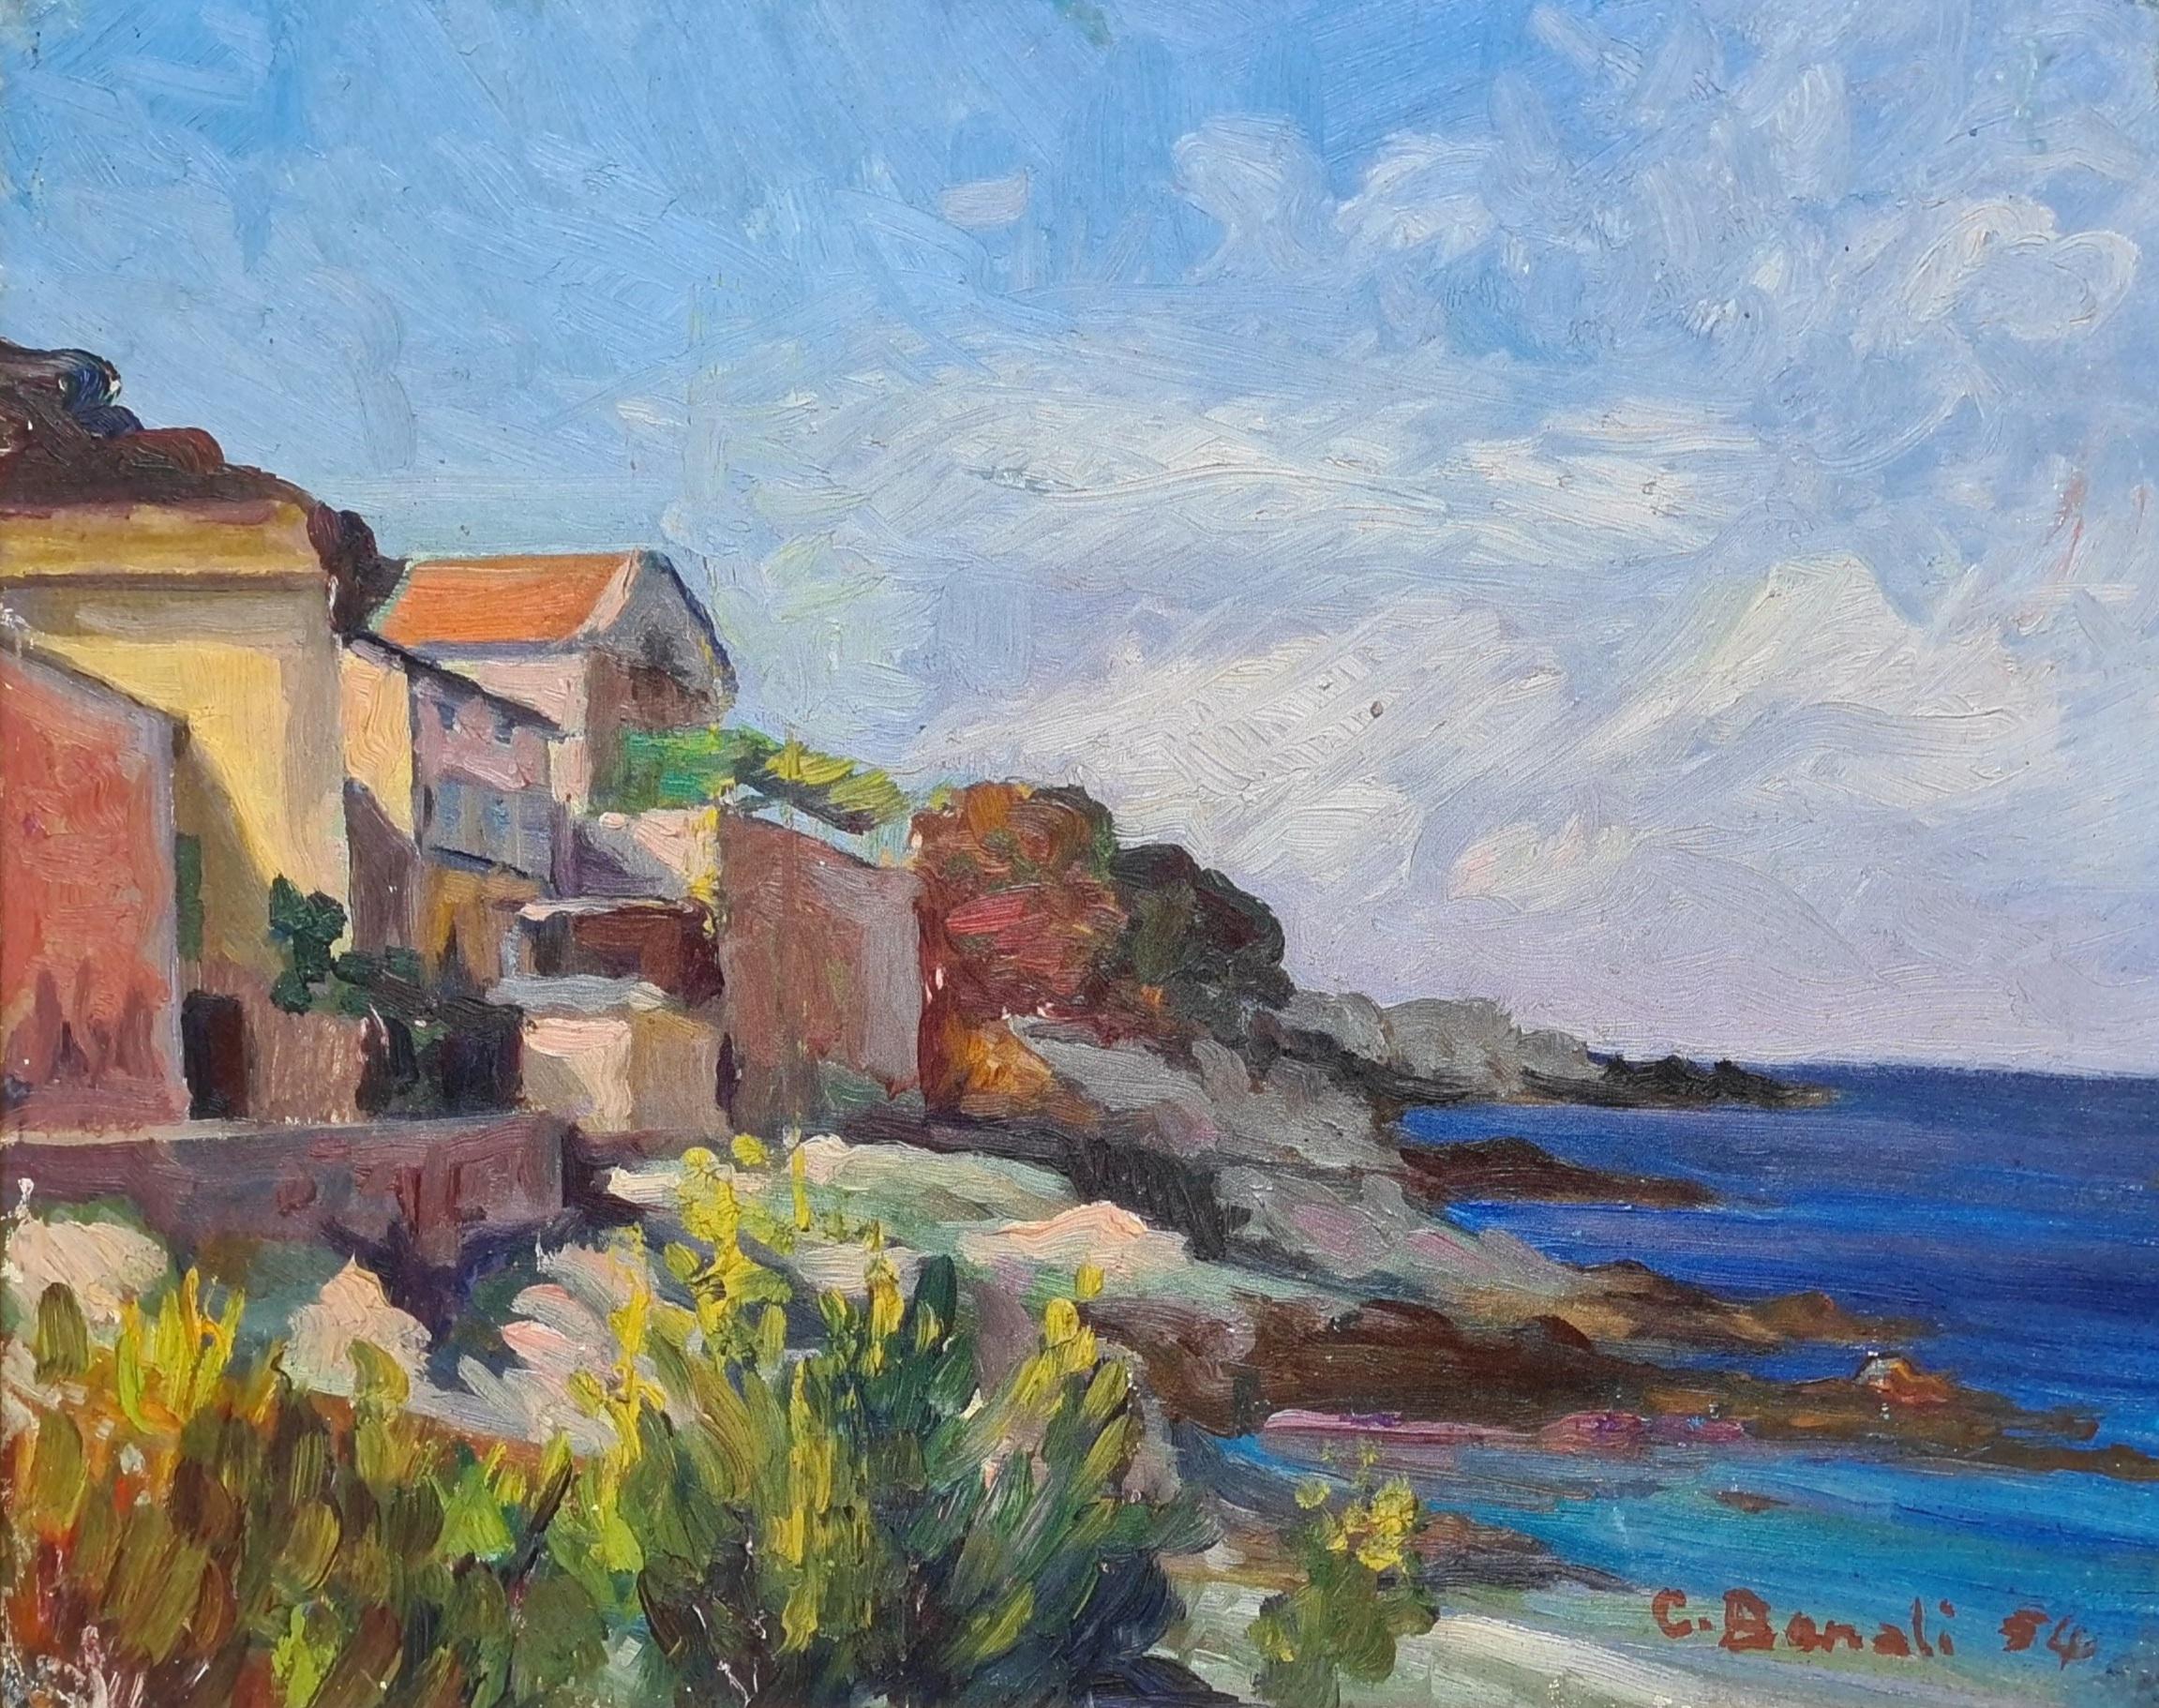 Impressionist Seascape of Cap Corse and The Ligurian Sea - Painting by C Benali